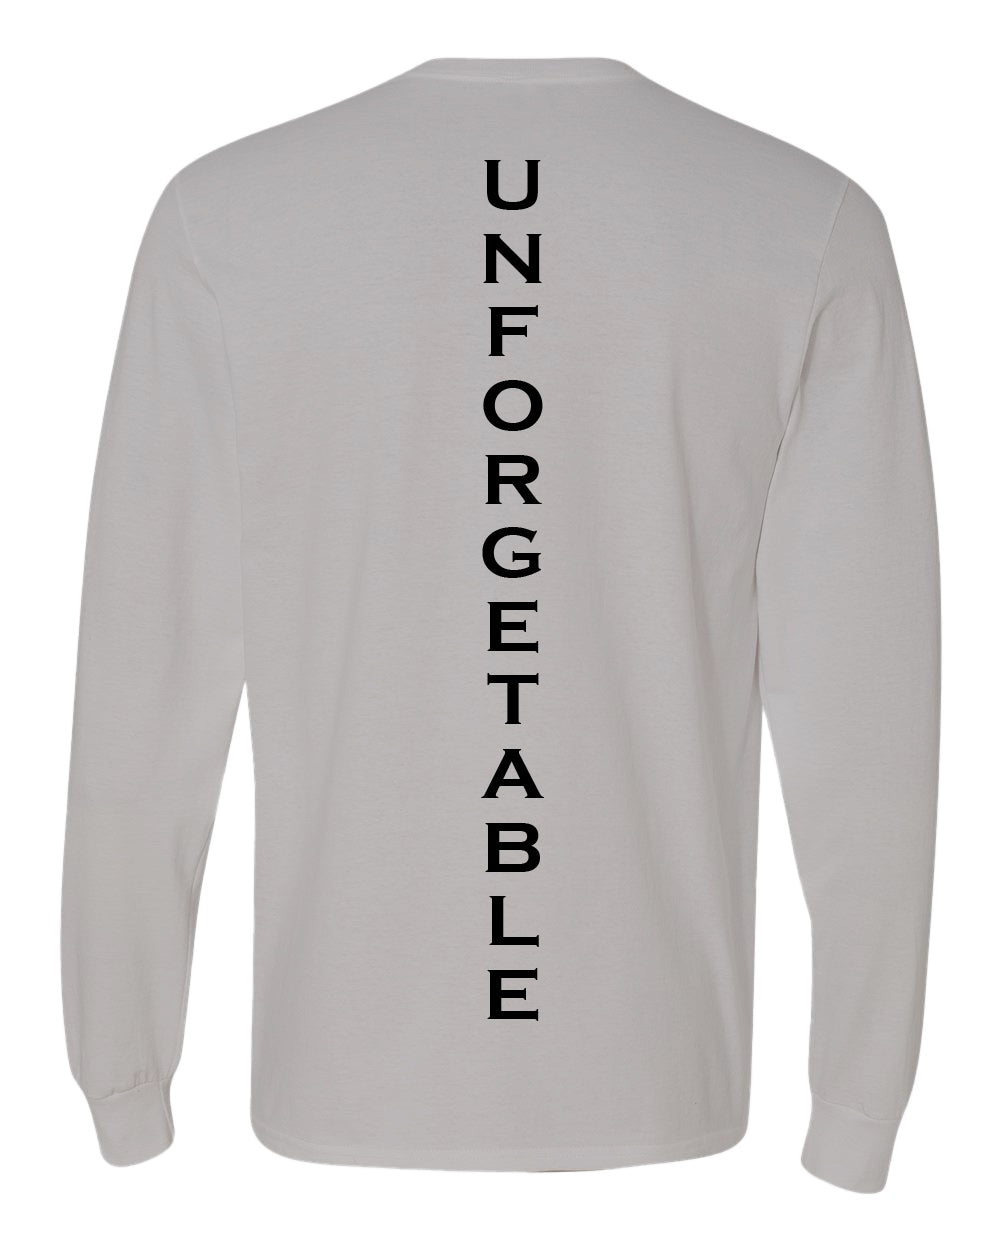 LEVELS UNFORGETTABLE (LONG SLEEVE) SHIRT